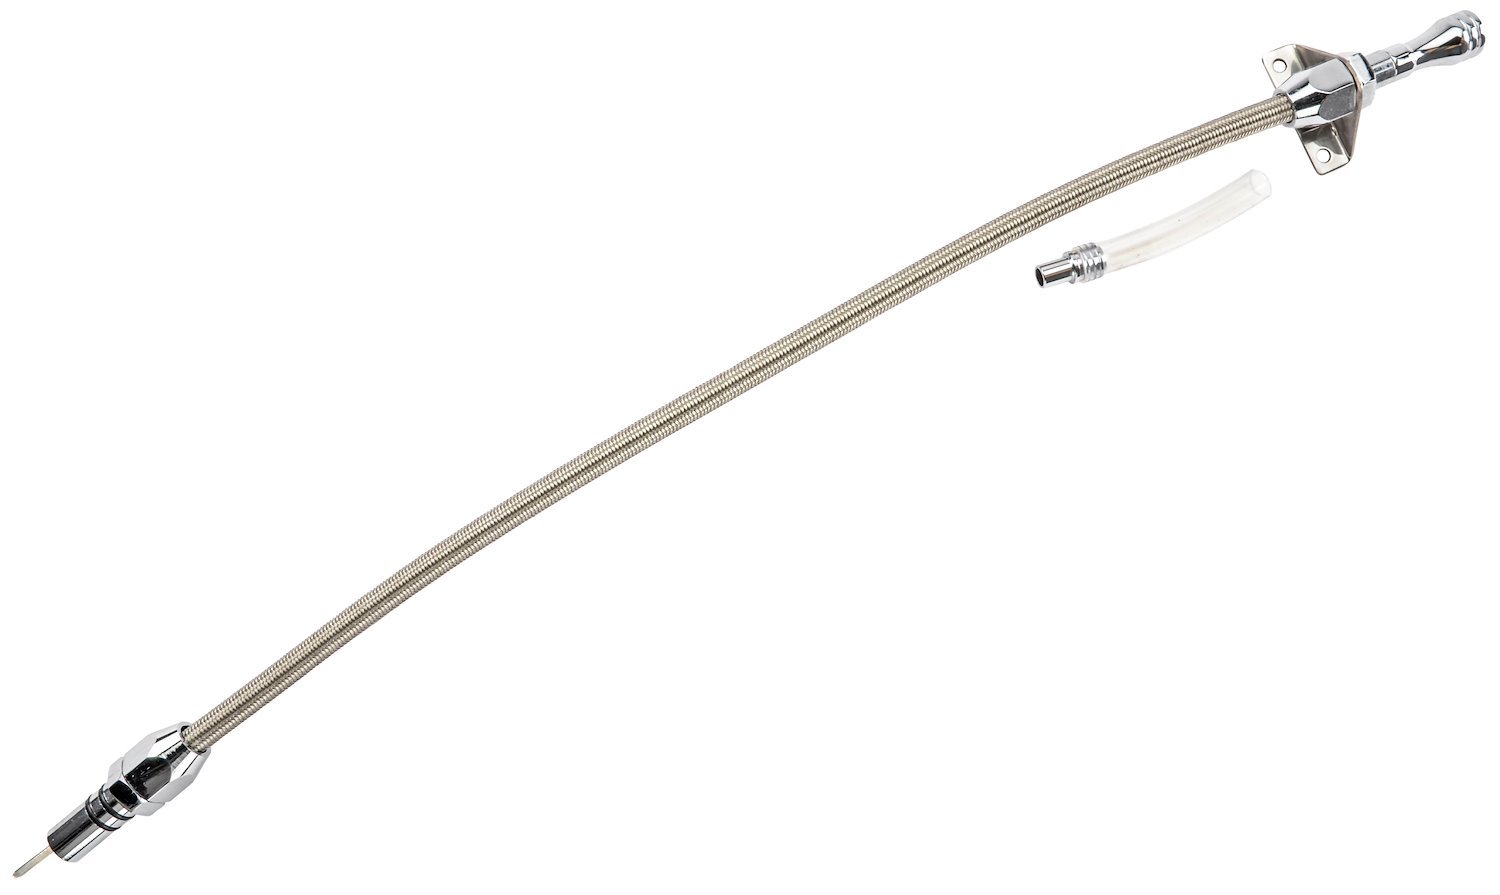 Flexible Braided Transmission Dipstick for TH350 & TH400 [Polished]